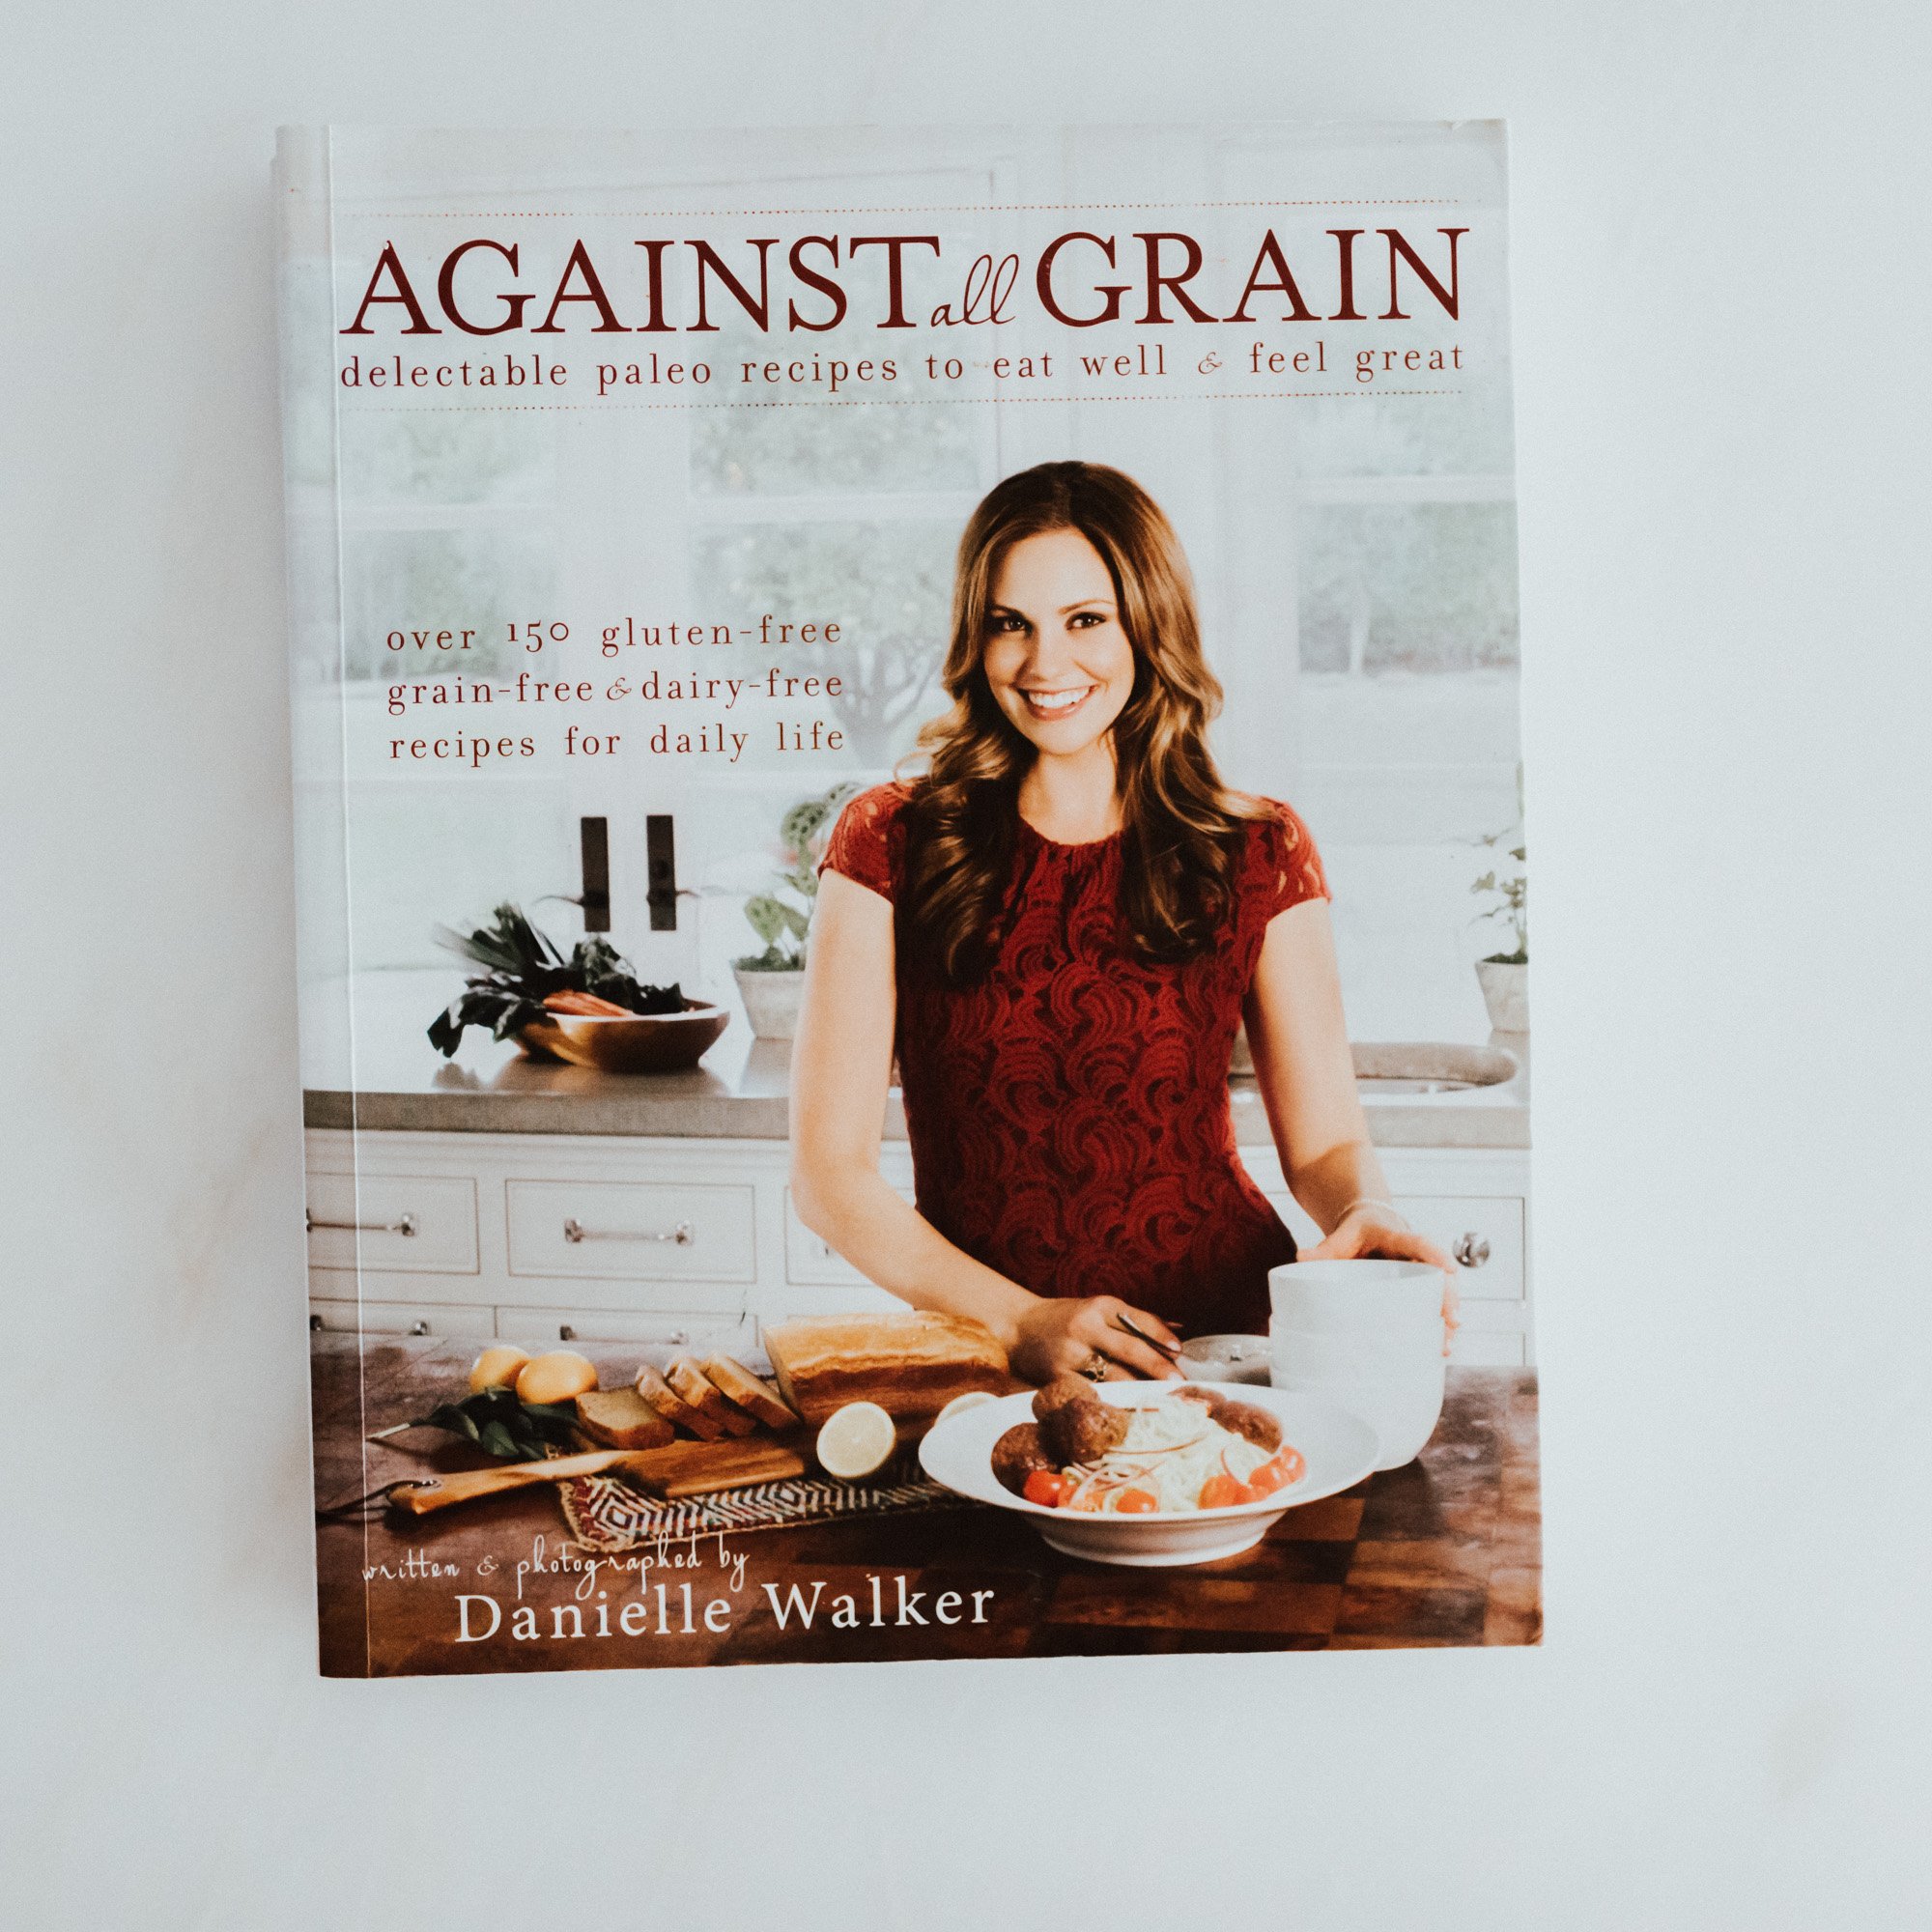 The Wild Decoelis | Our Favorite Paleo Cookbooks Of the Moment | Against All Grain